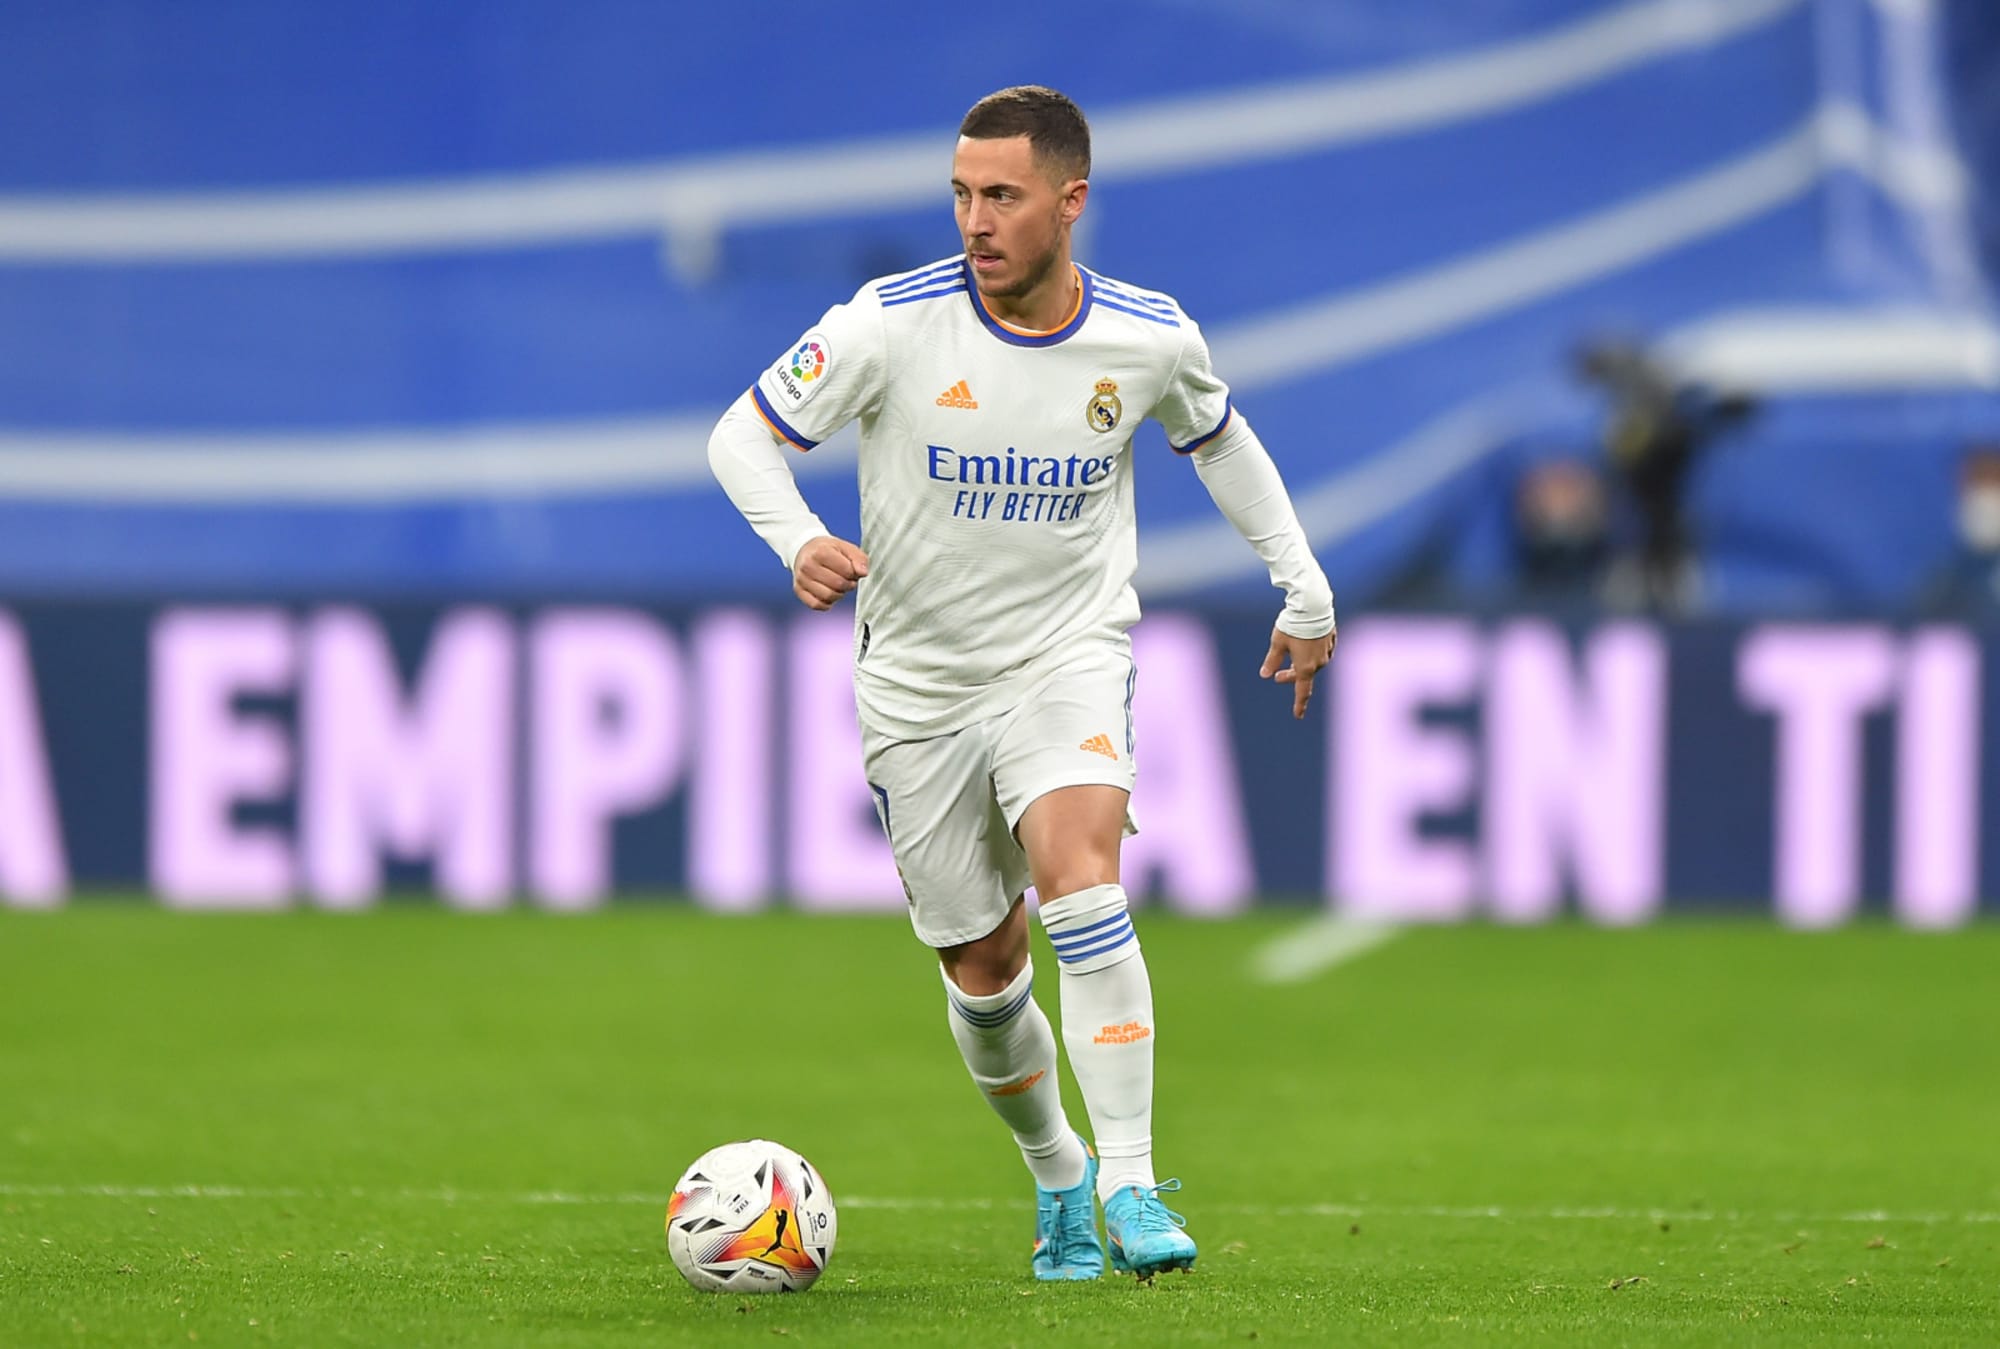 Eden Hazard could return from injury before LaLiga season ends